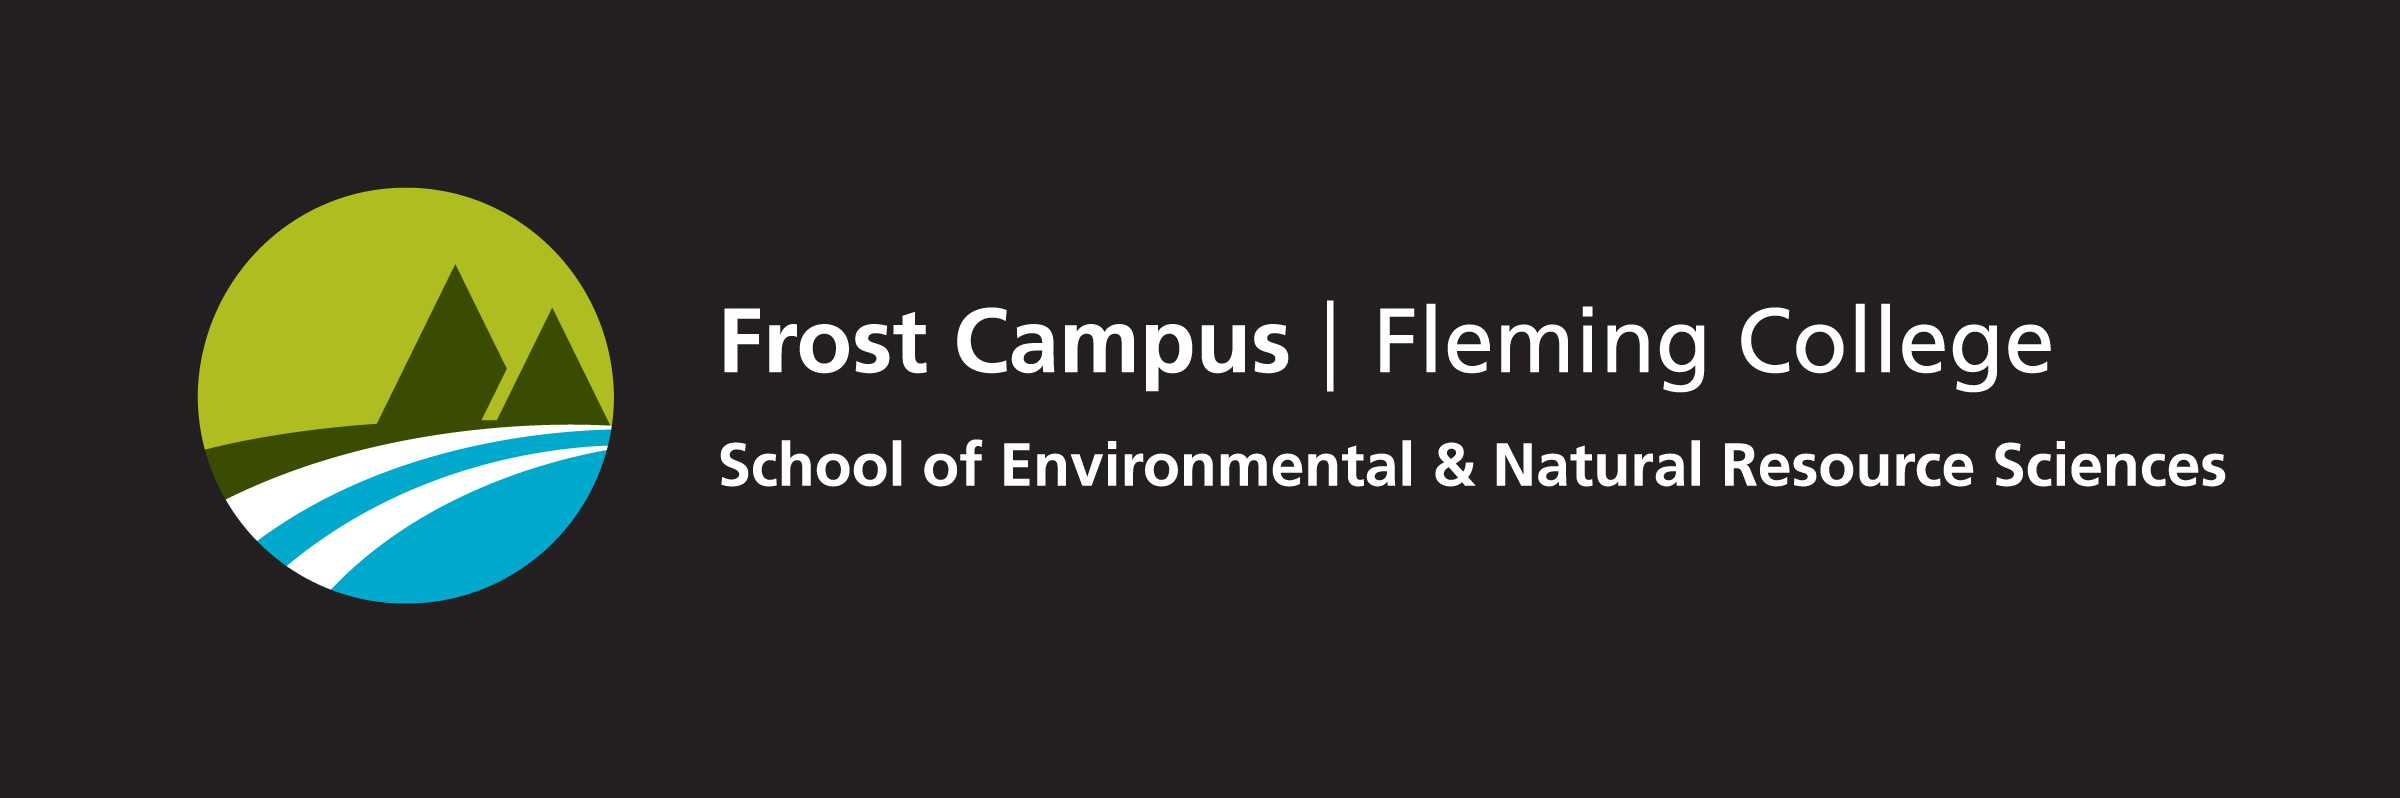 Frost Campus Logo